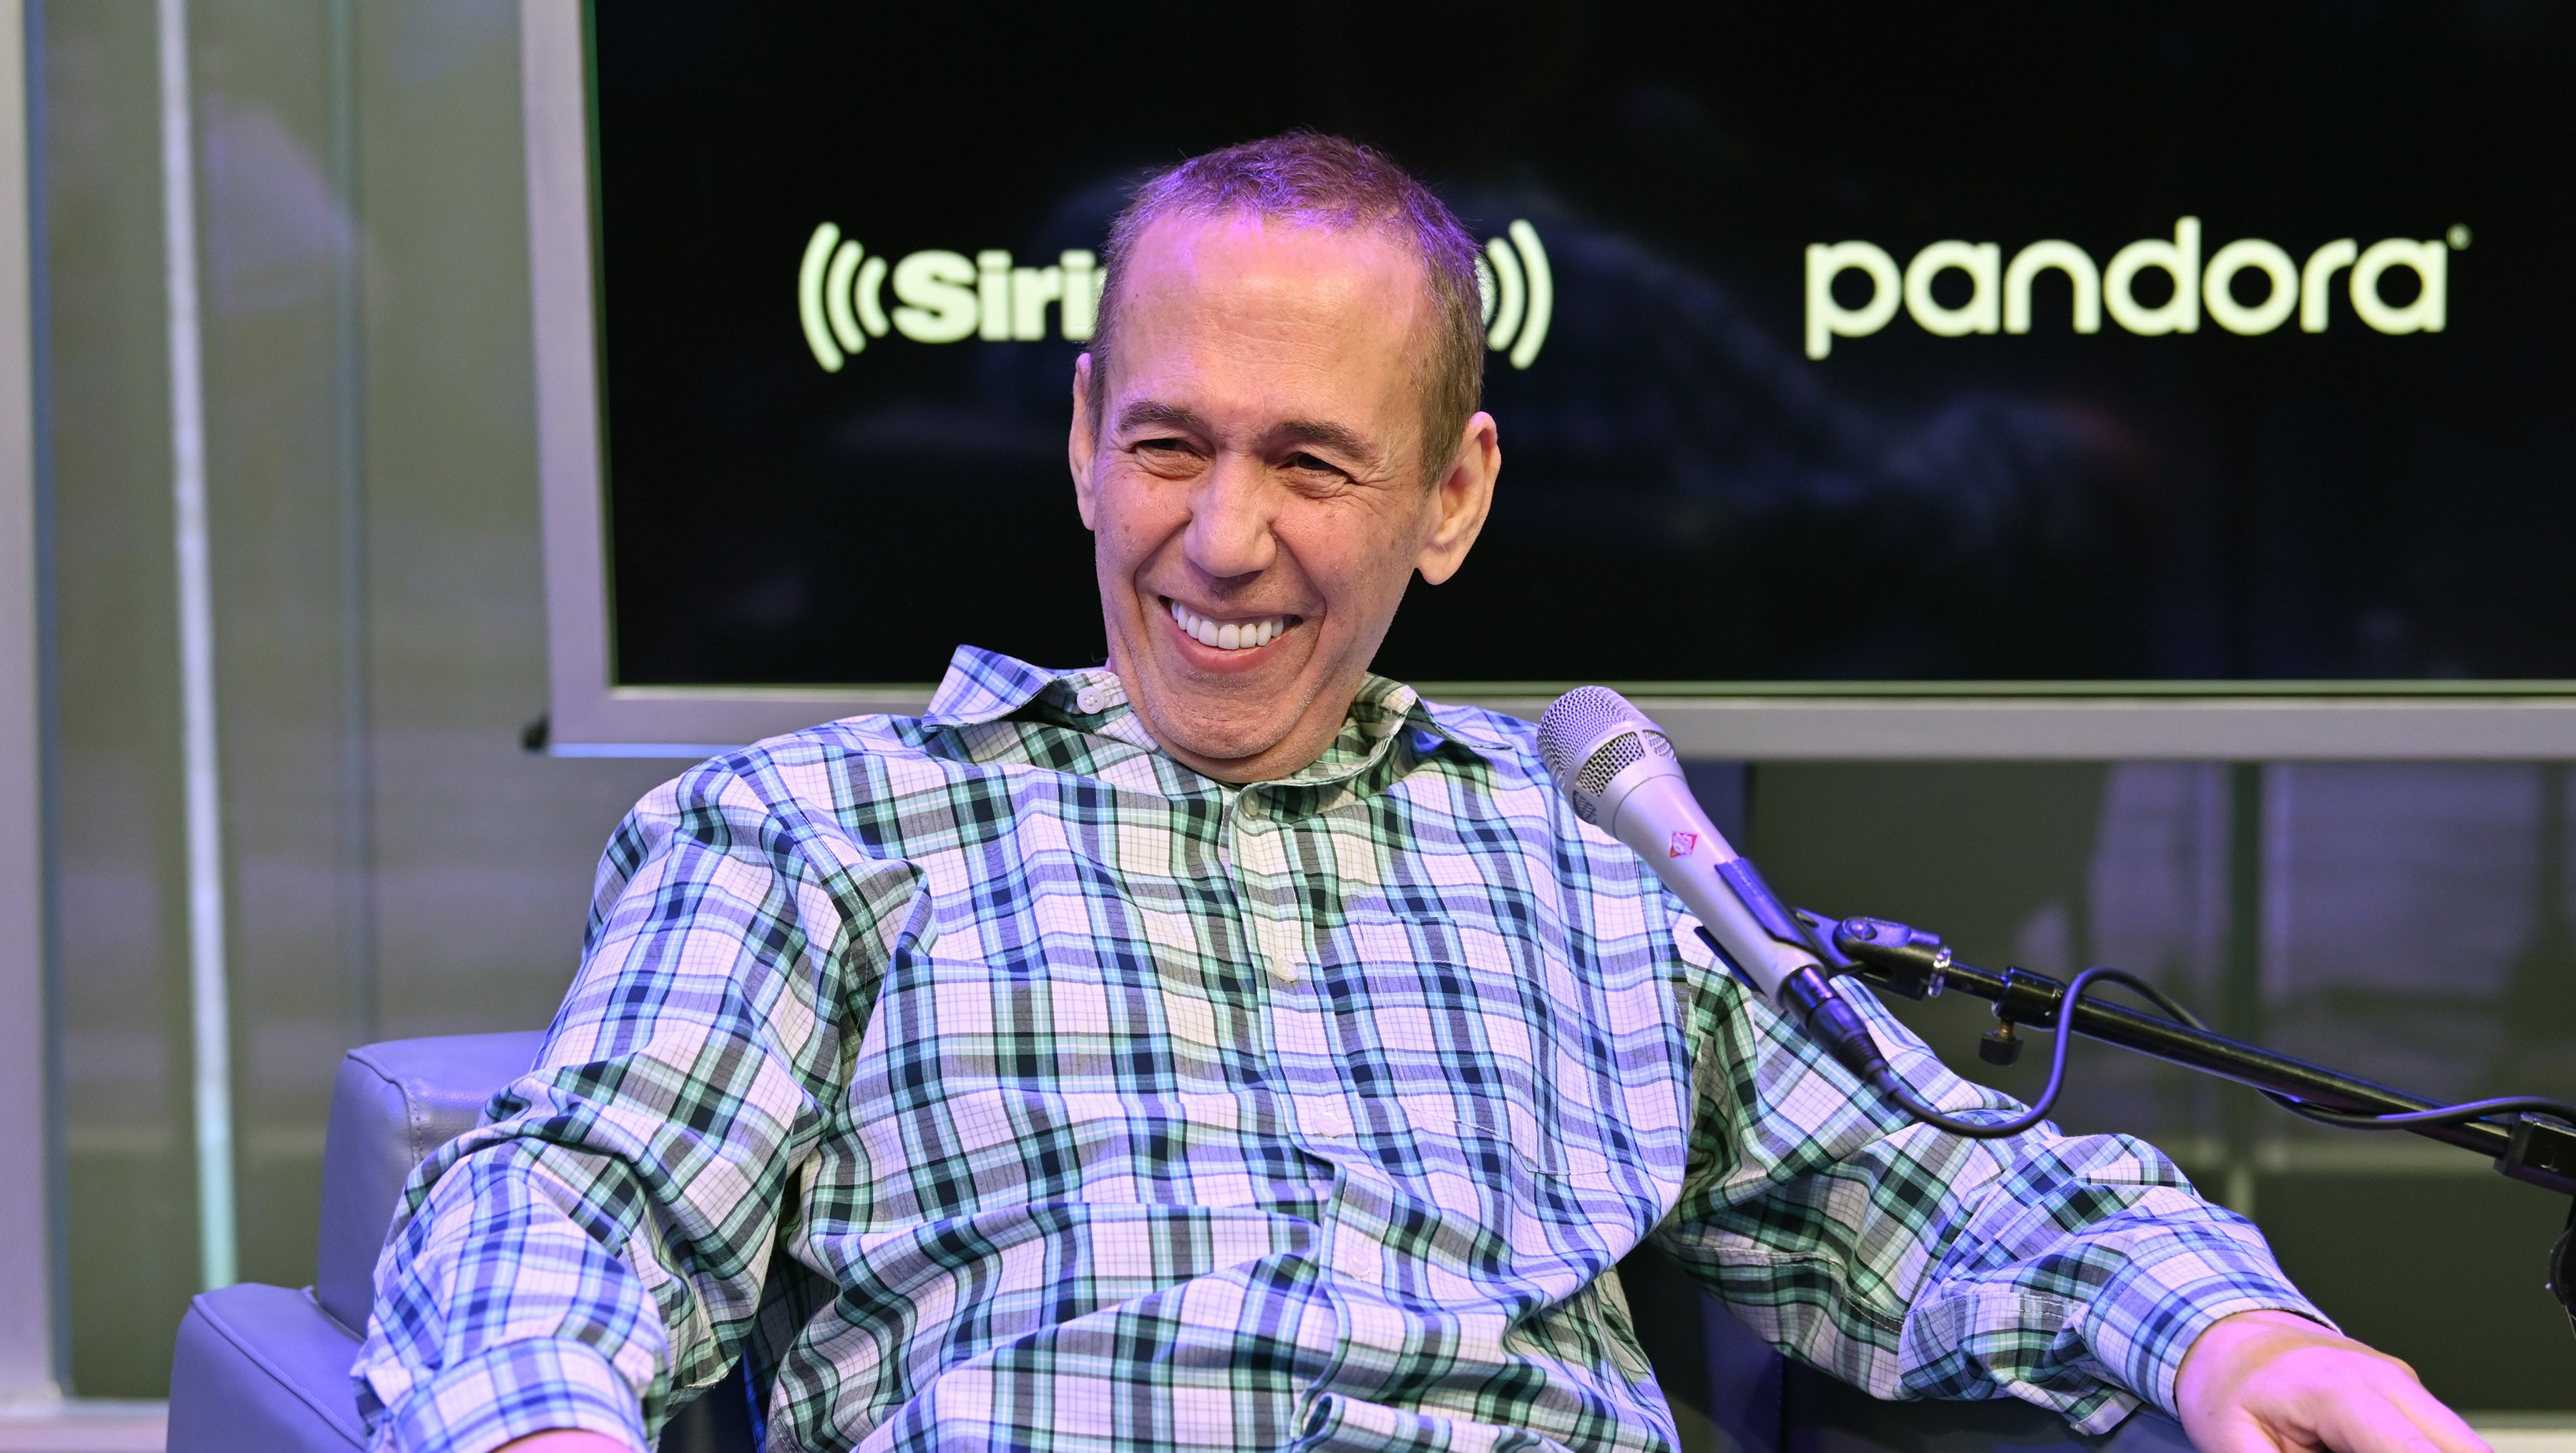 Gilbert Gottfried And Frank Santopadre Co-host &quot;Amazing Colossal Show&quot; On Comedy Greats